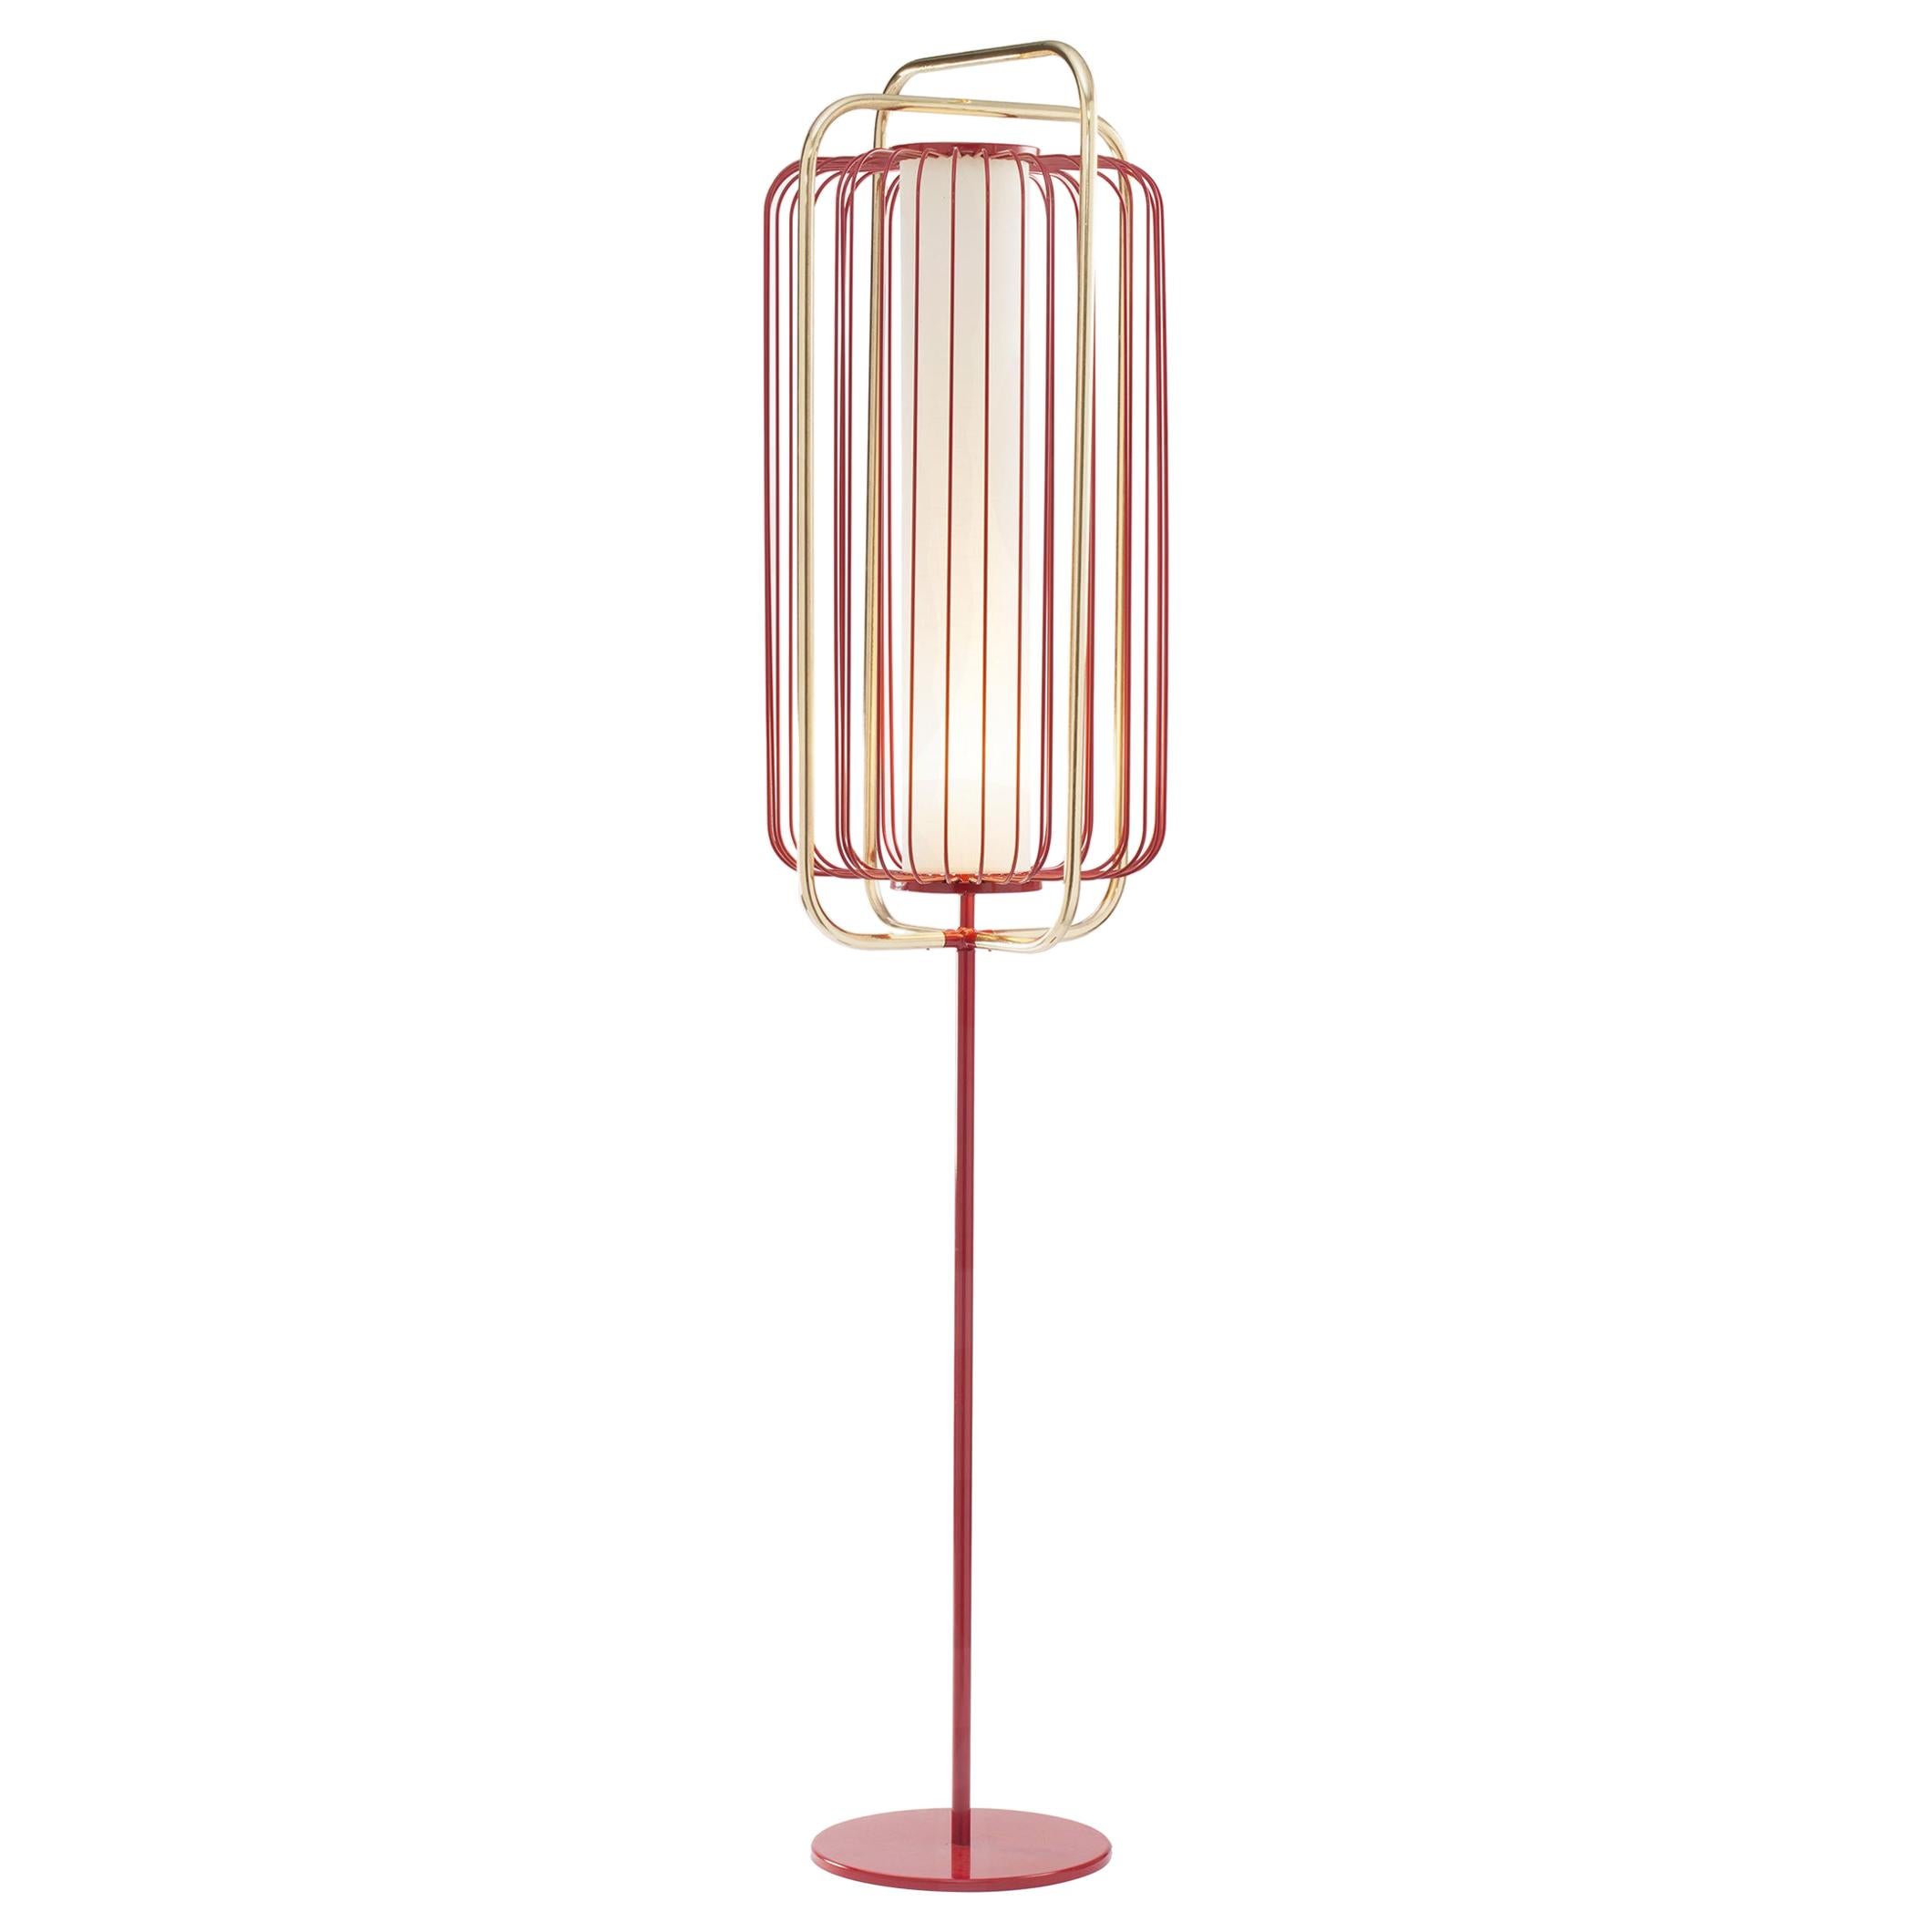 Contemporary Art Deco inspired Jules Floor Lamp in Lipstick Red, Linen and Brass